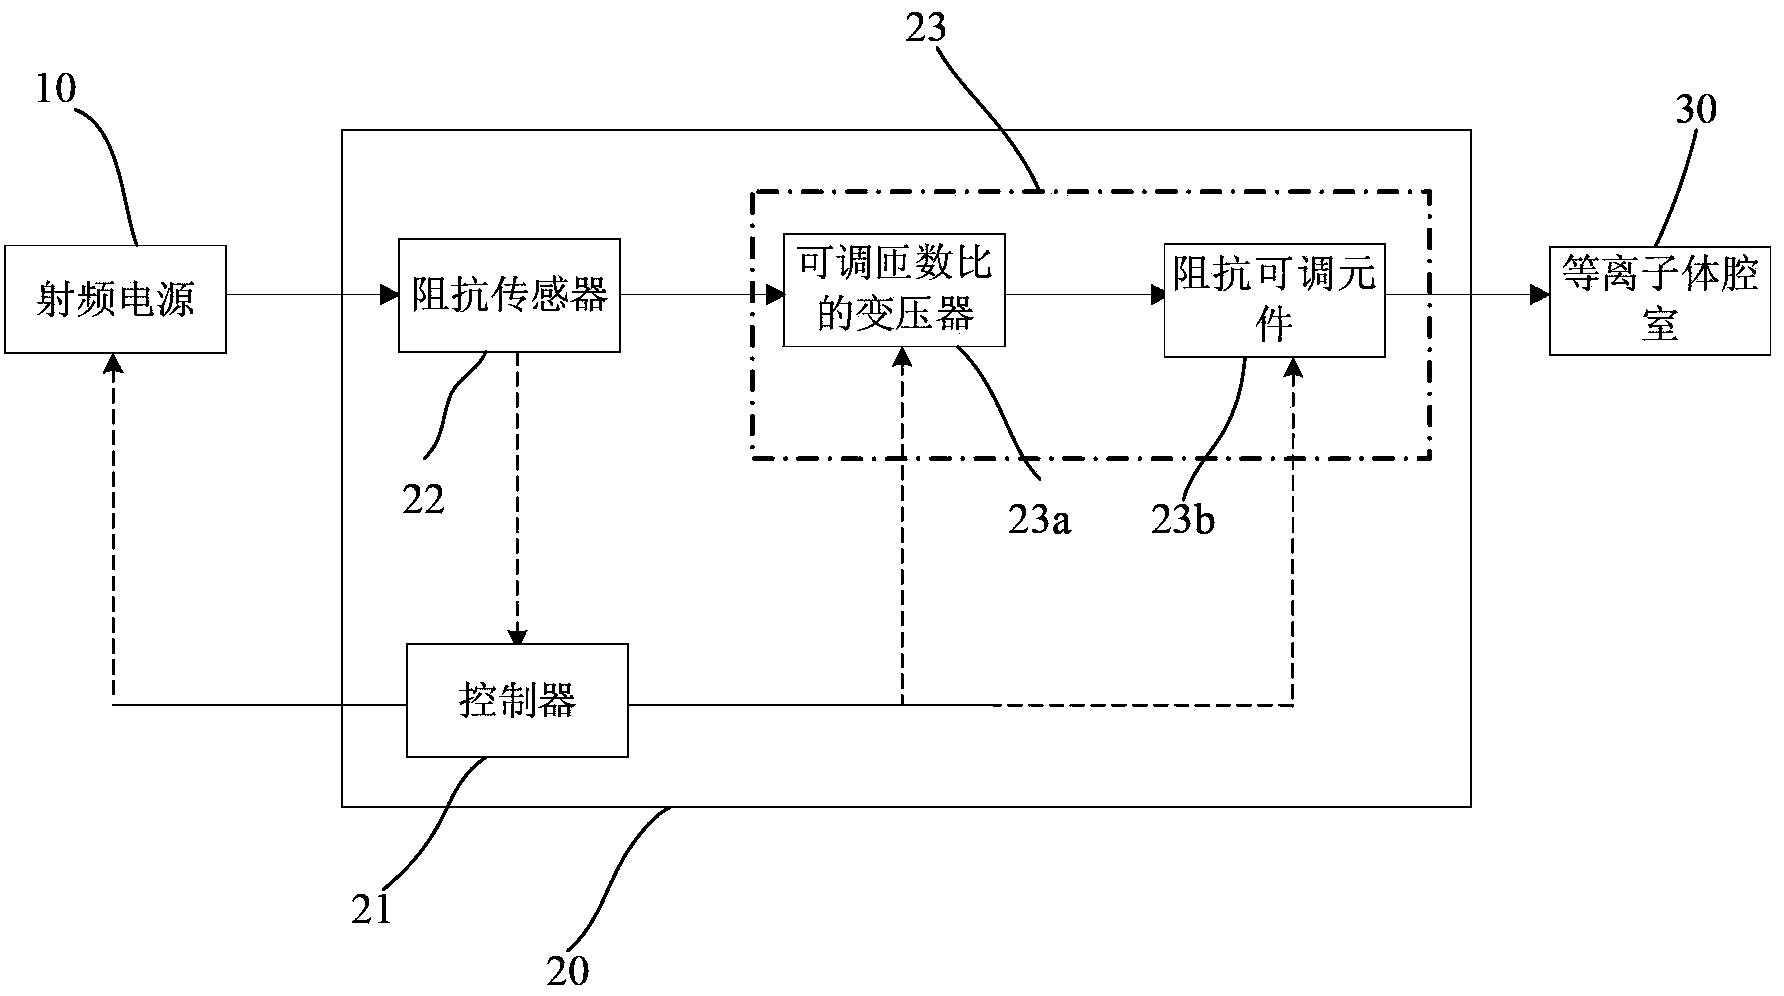 Radio frequency power supply system and a method for performing impedance matching by utilizing radio frequency power supply system